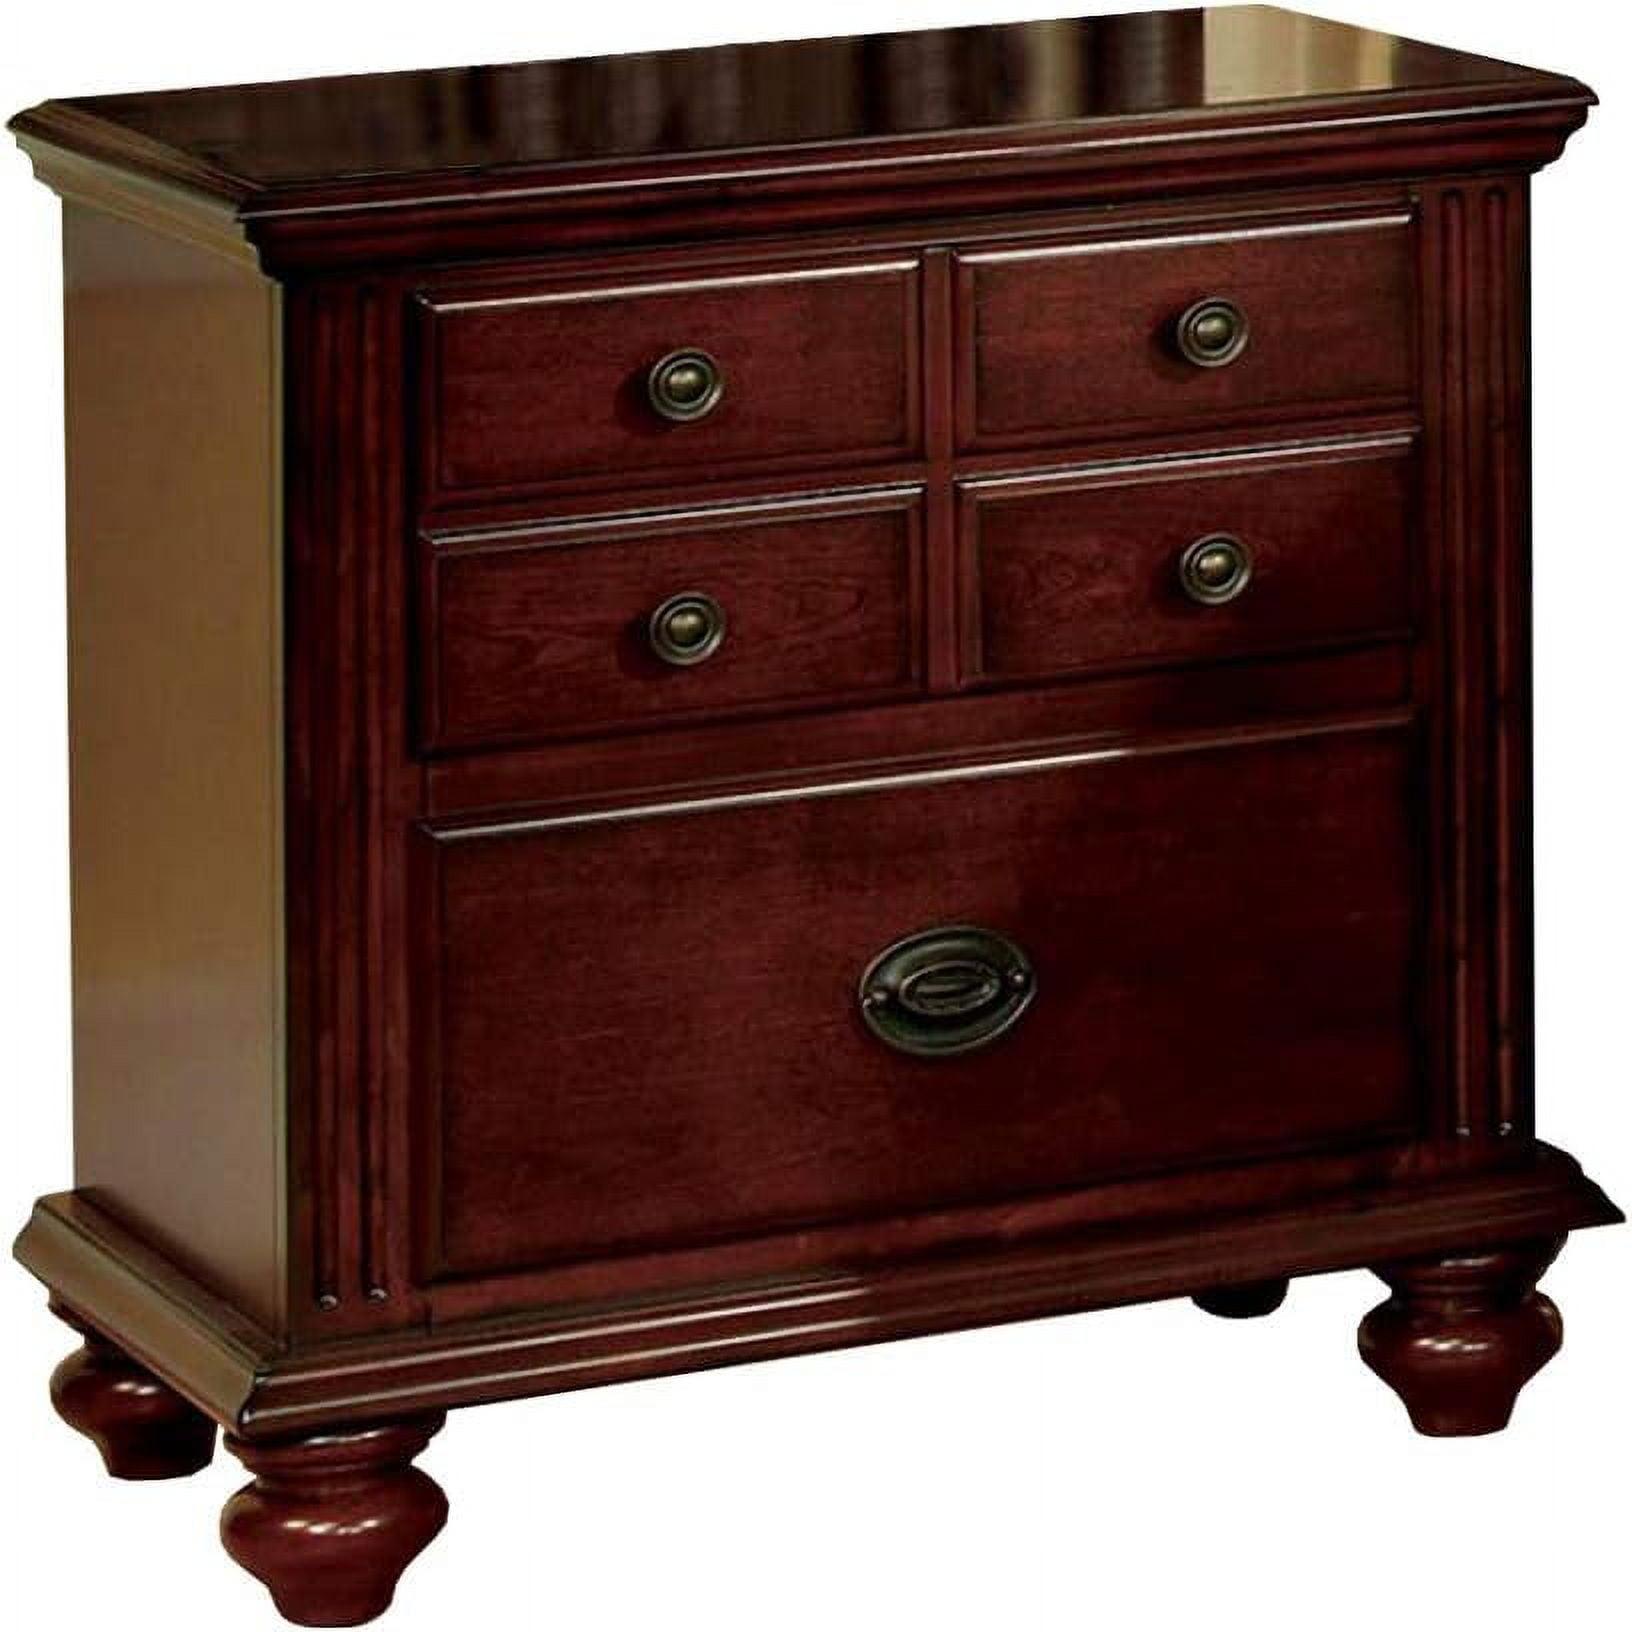 Elegant Cherry Finish 2-Drawer Traditional Nightstand with Antique Gold Knobs